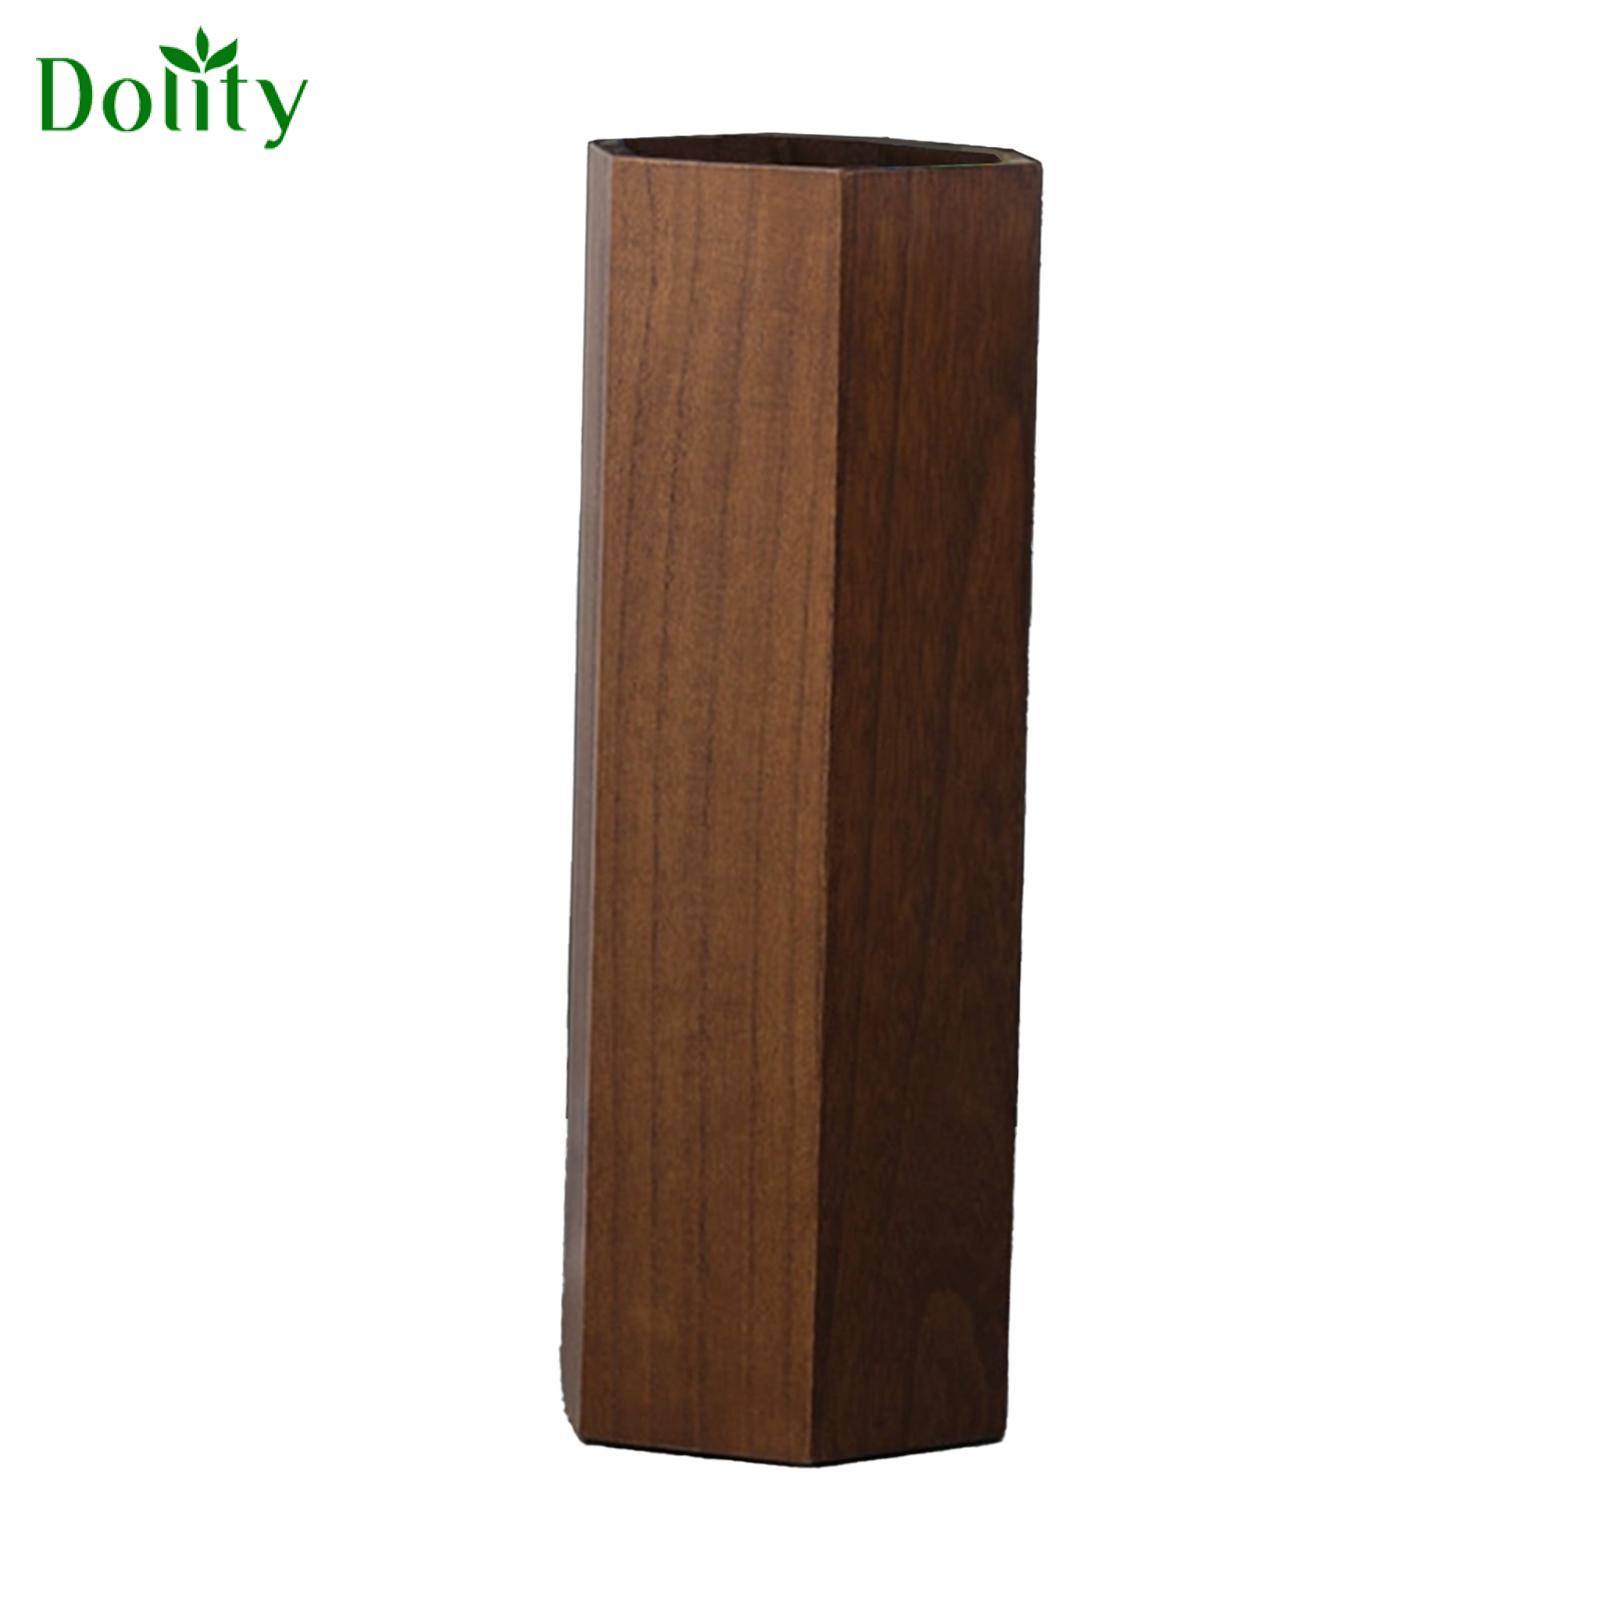 Dolity Wooden Umbrella Holder Large Capacity Home for Supermarket Entryway